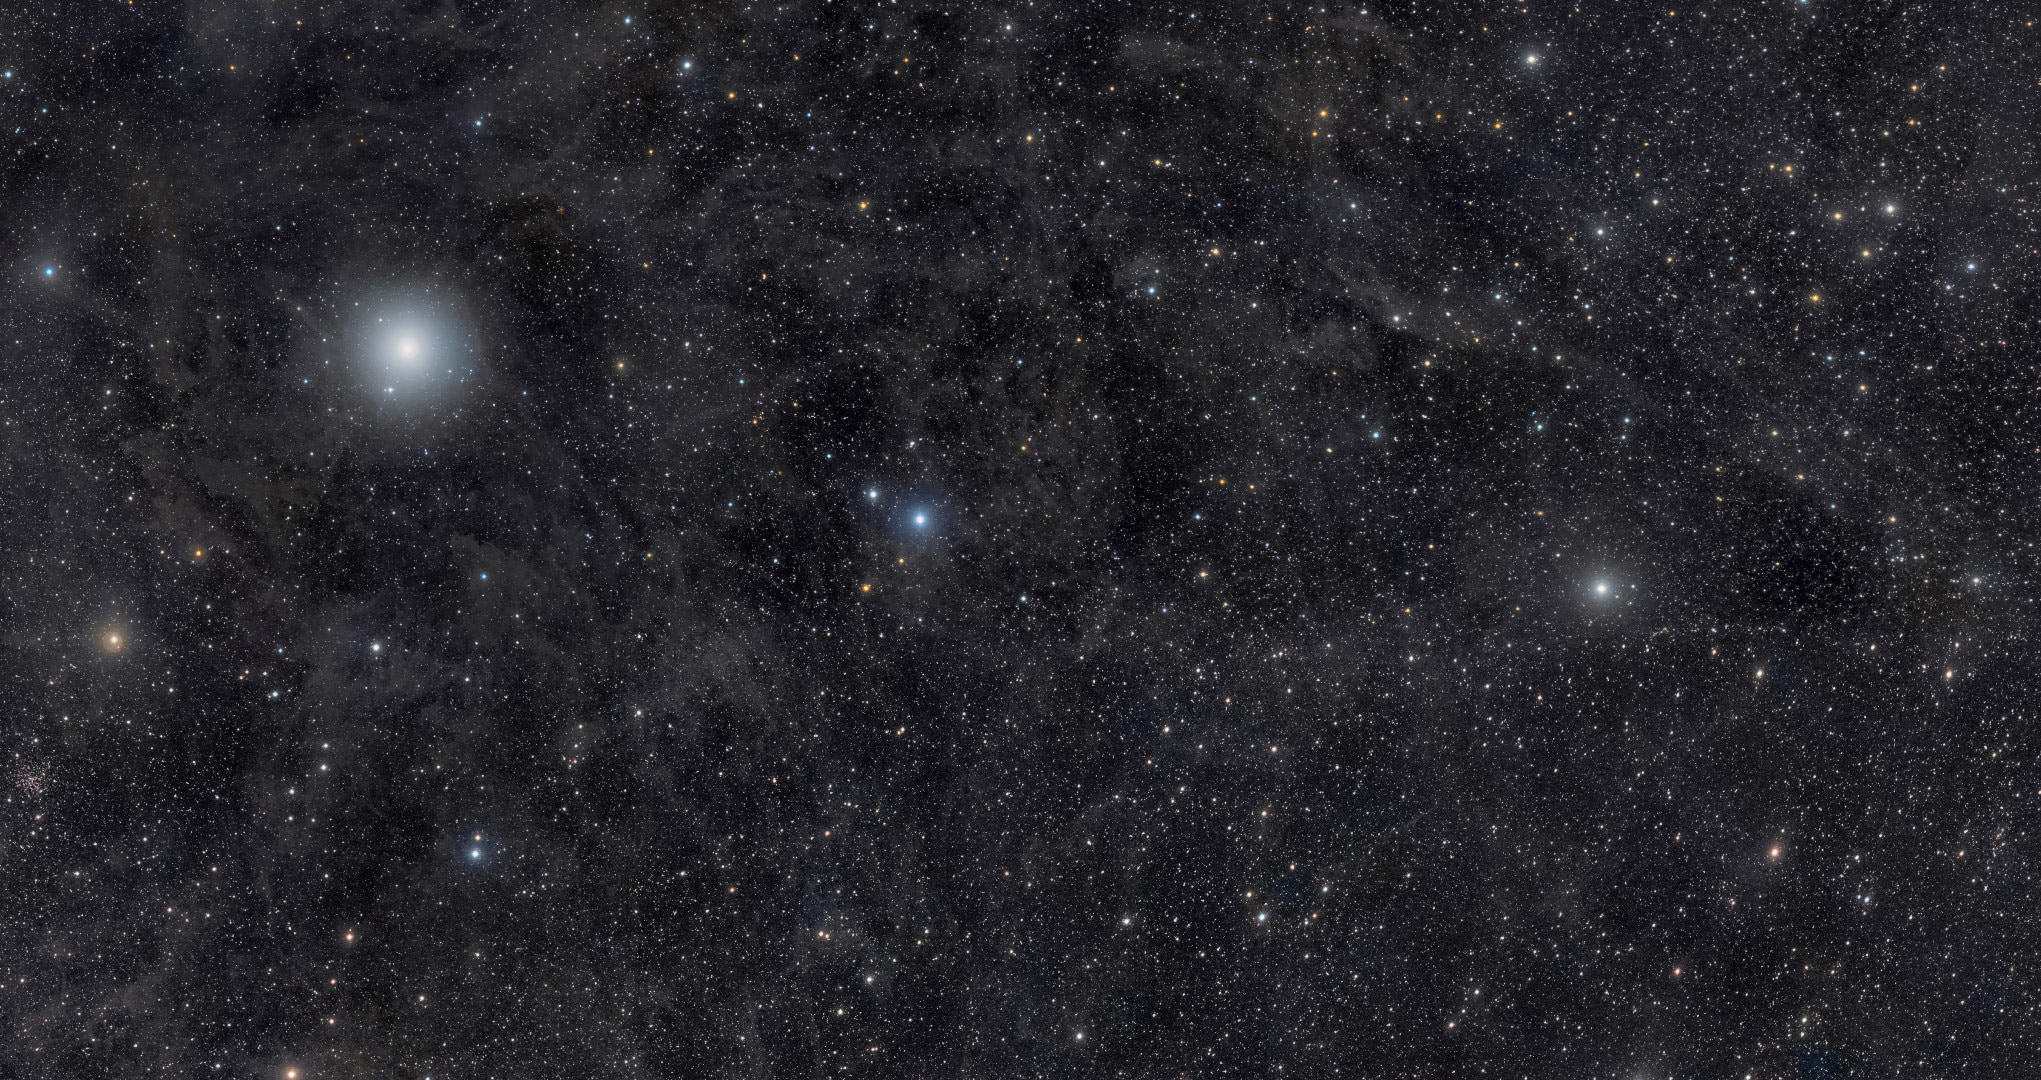 Ursa Minor — the Little Dipper — is gorgeous in this deep mosaic that shows thousands of stars, faint wisps of dust, and a brief interplanetary visitor. Credit: Rogelio Bernal Andreo